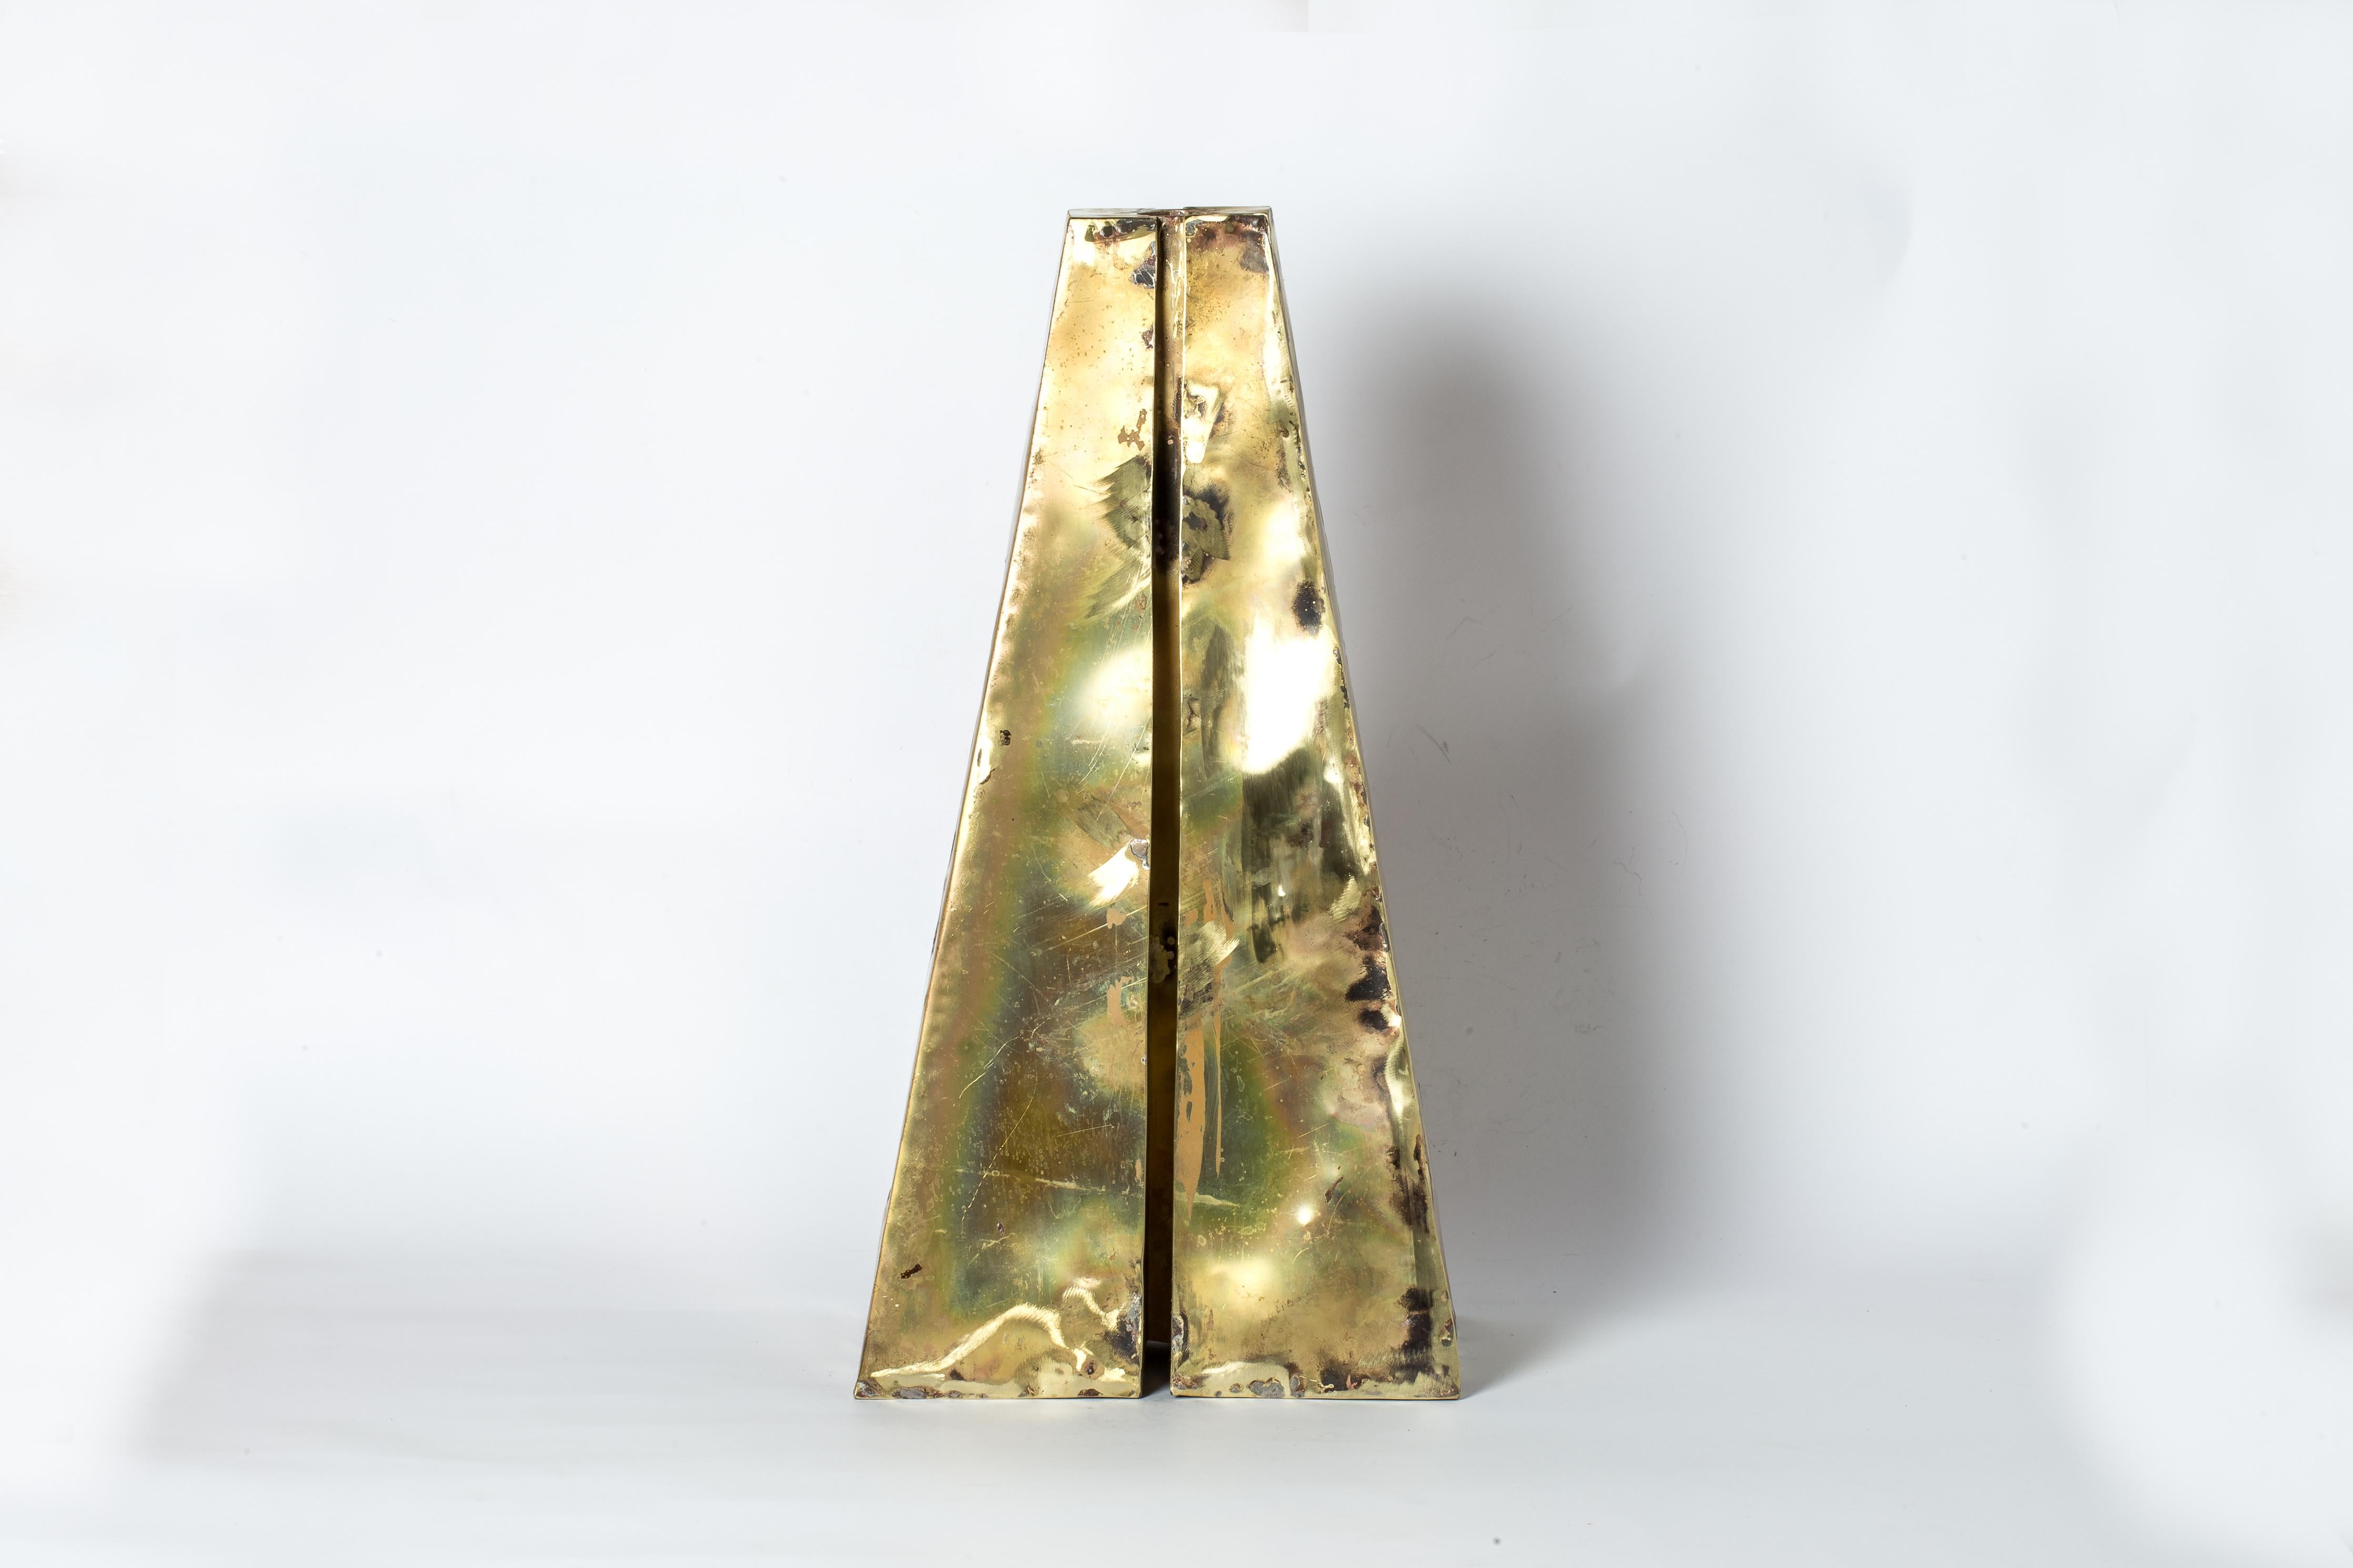 Candle Tower in brass. This piece is 100% hand fabricated from metal plate; cut into sections and soldered together to make the hollow three dimensional form. It's more than just a candle holder; it's a captivating work of art that exudes charm and